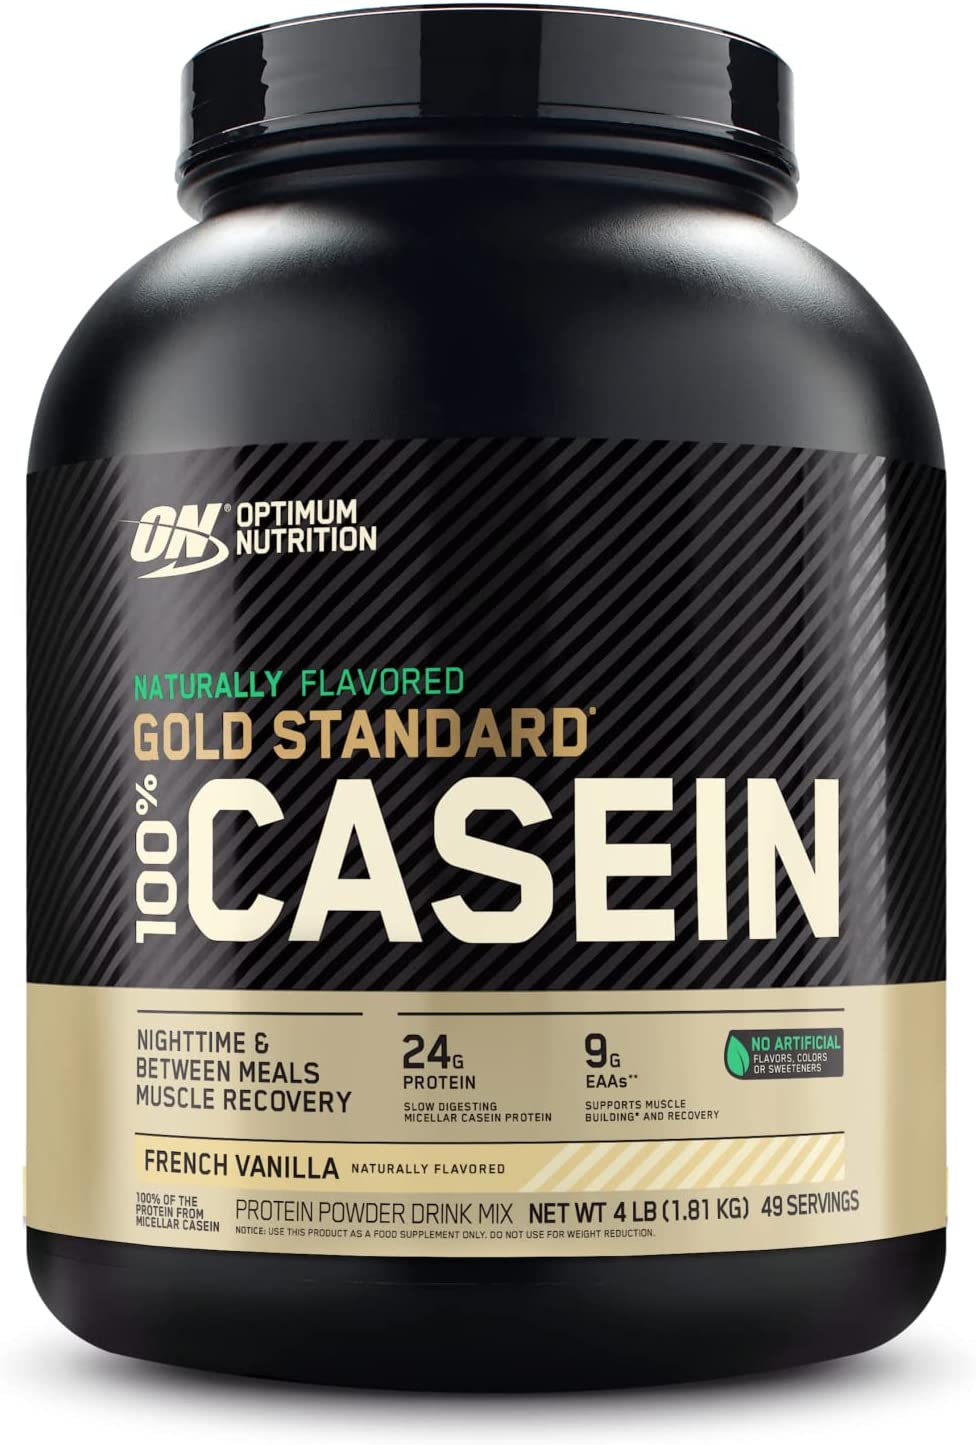 Optimum Nutrition Naturally Flavored Gold Standard 100% Casein, French Vanilla, 4lbs, 1.81kg, 49 Servings, SNS health, Sports Nutrition 